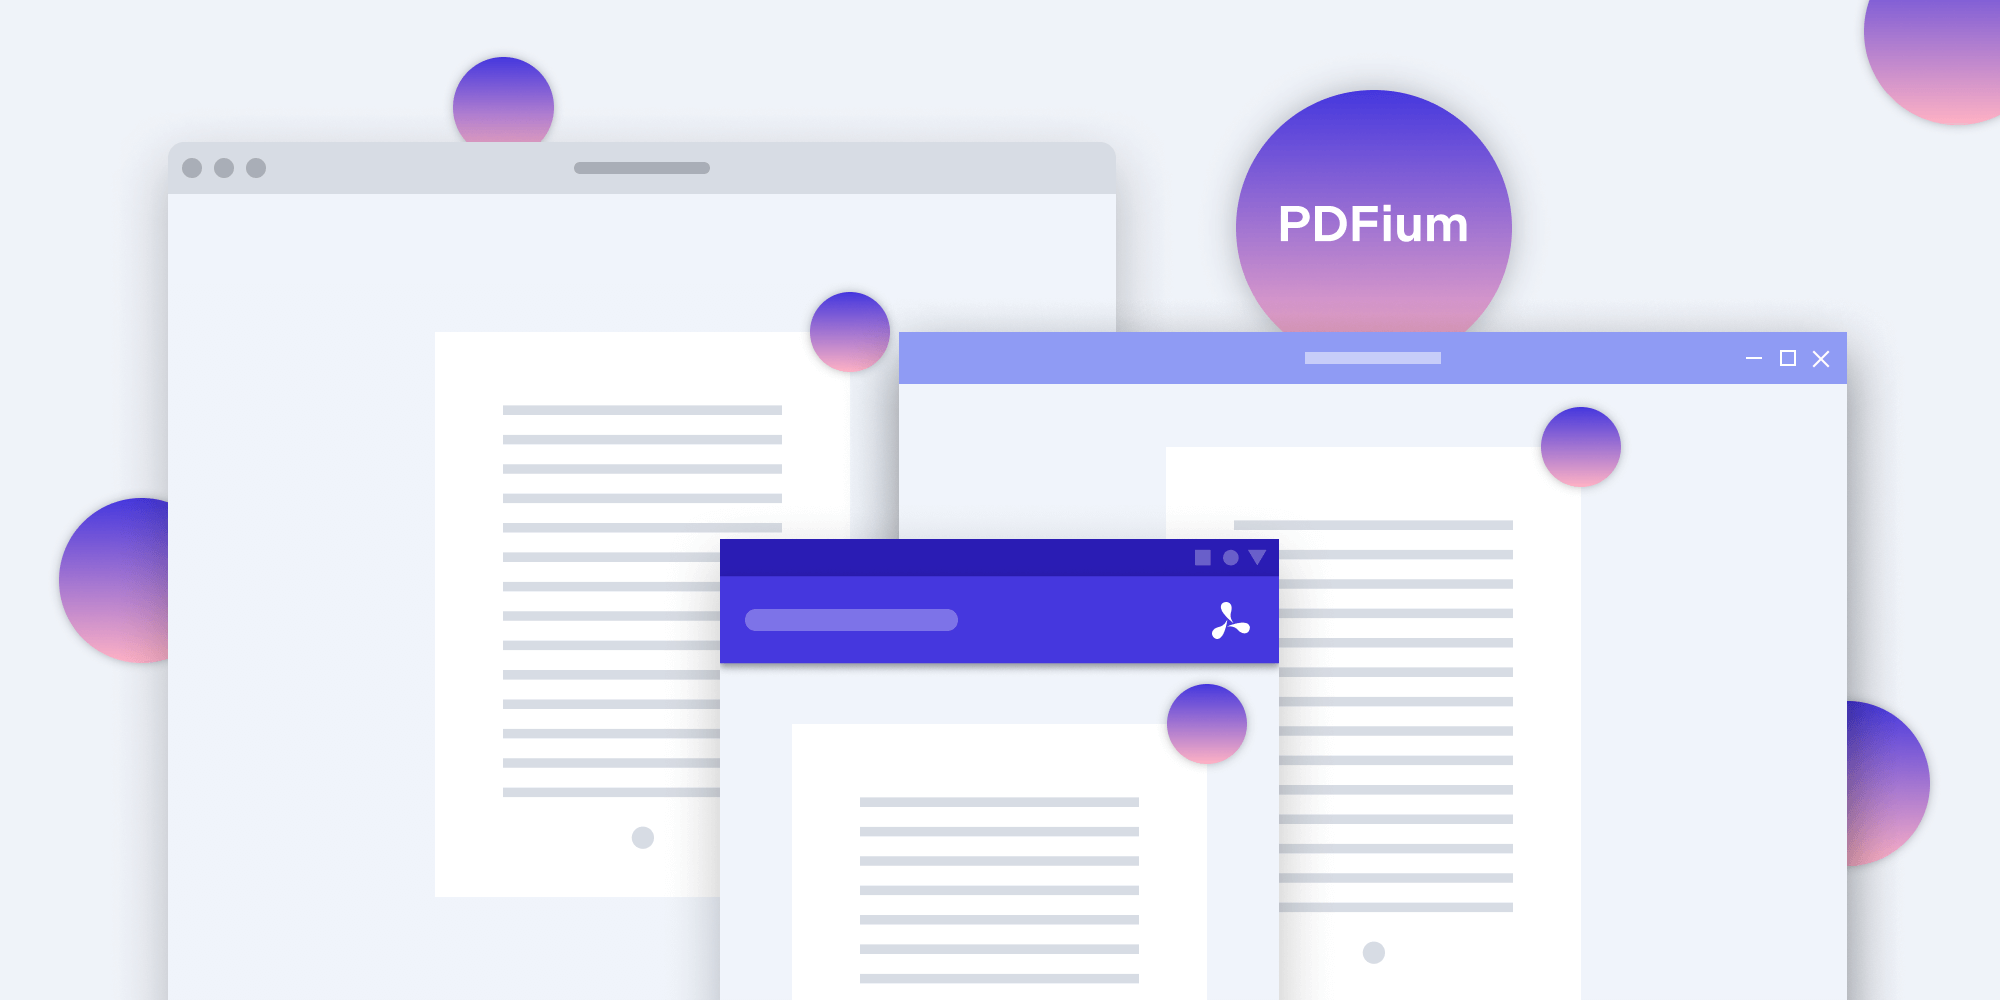 PDFium’s presence in web browsers, Android devices, and PSPDFKit